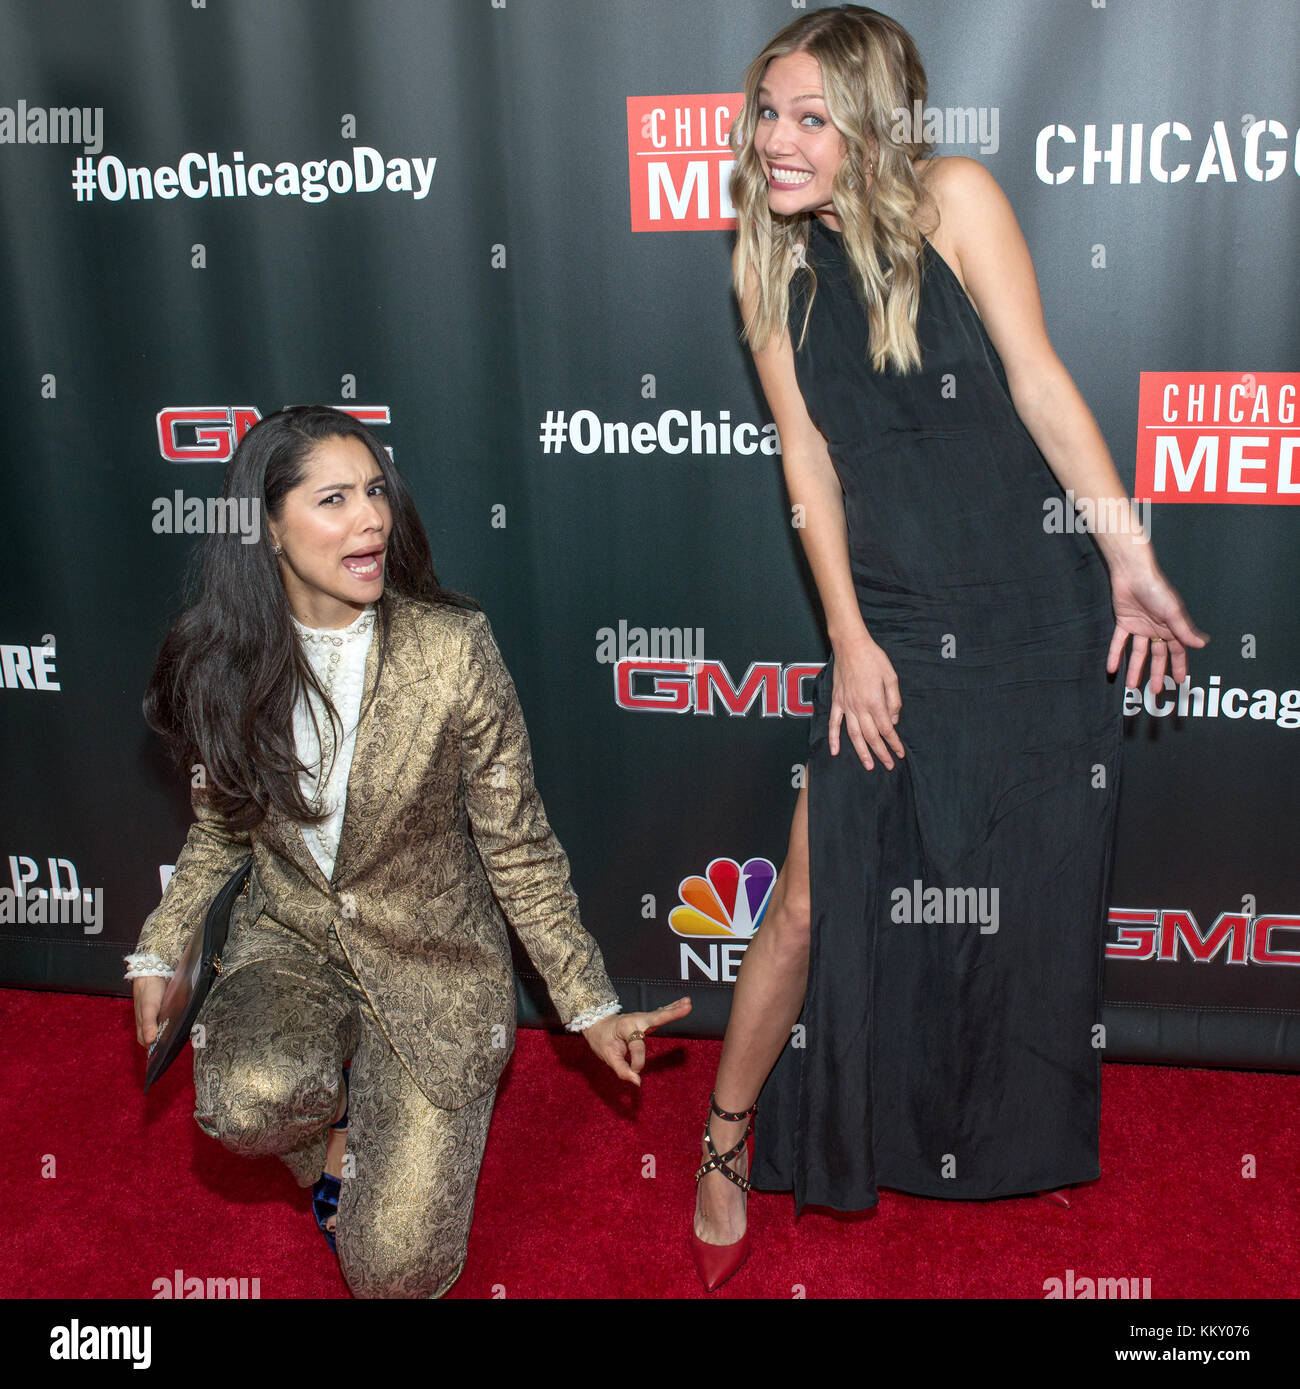 3rd annual NBC One Chicago Party featuring cast members from Chicago Fire, Chicago Med and Chicago P.D - Arrivals  Featuring: Miranda Rae Mayo, Tracy Spiridakos Where: Chicago, Illinois, United States When: 31 Oct 2017 Credit: WENN Stock Photo